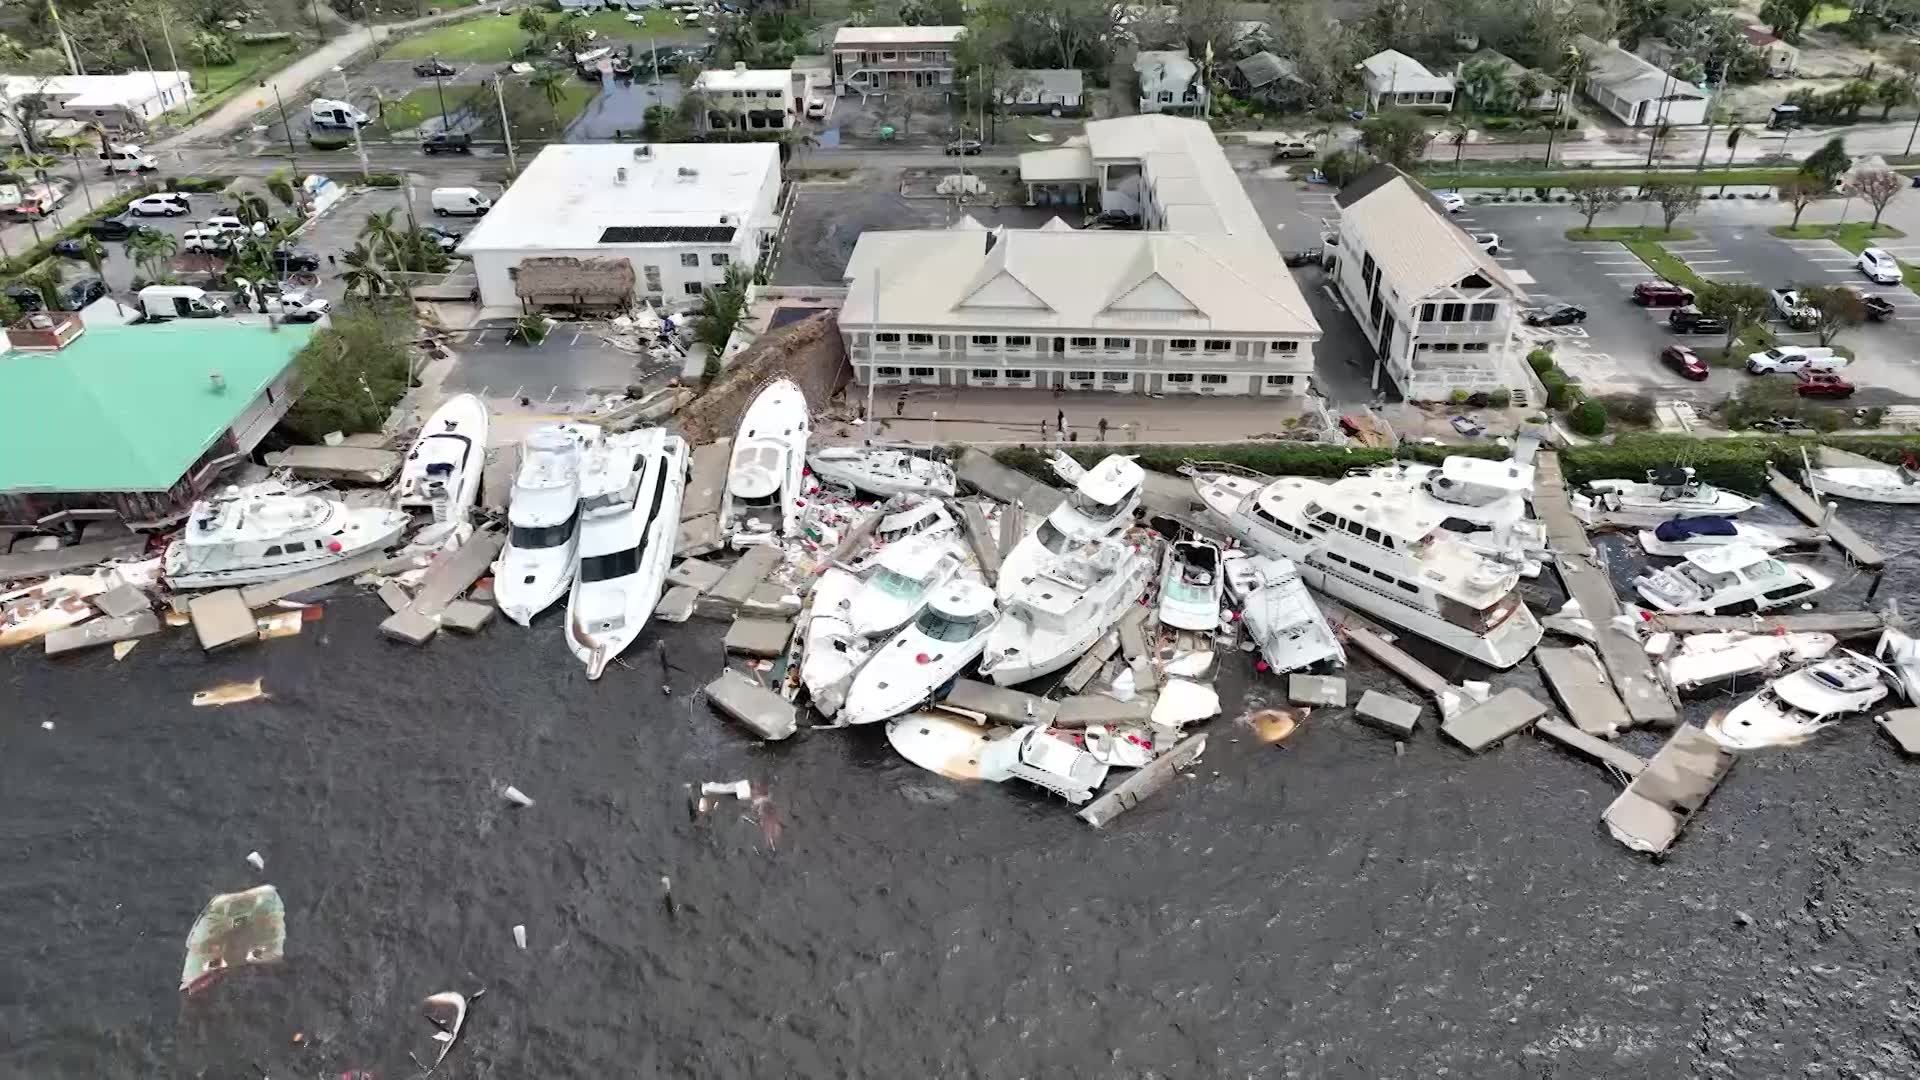 Drone footage shows hurricane damage in Fort Myers